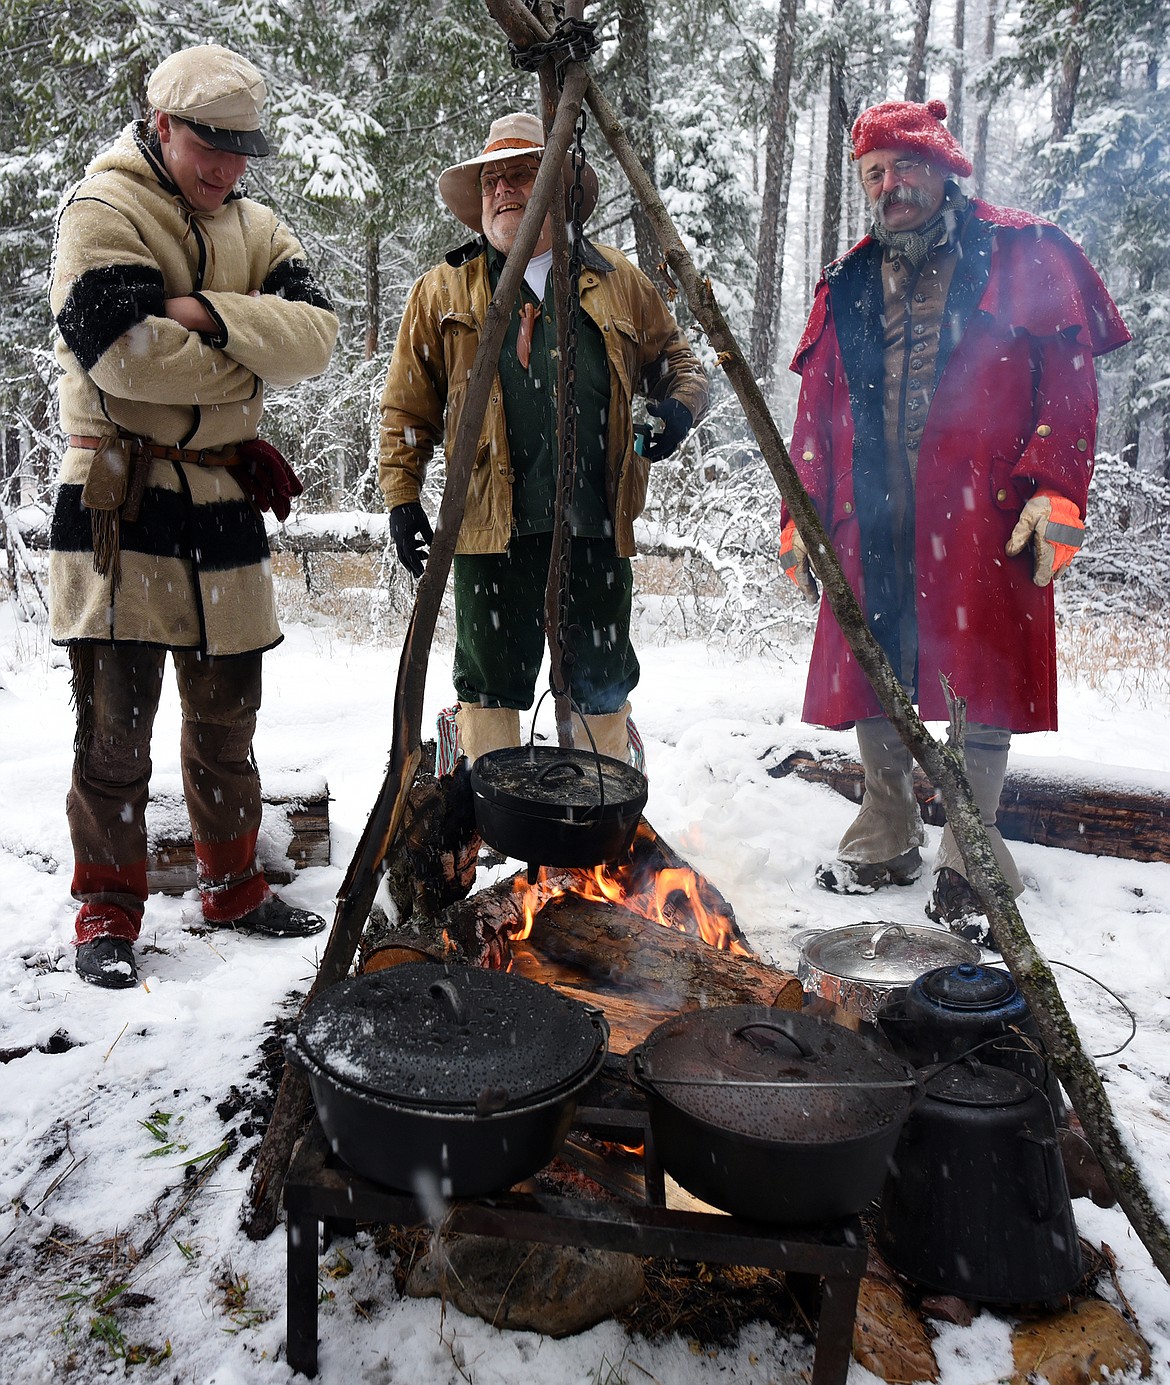 Flathead Muzzleloaders Association members Sean McQueen, Jon Erdman and Steve Radosovich trade stories around the campfire at the a gathering of the group near Columbia Falls Saturday. Dec. 4. (Jeremy Weber/Daily Inter Lake)